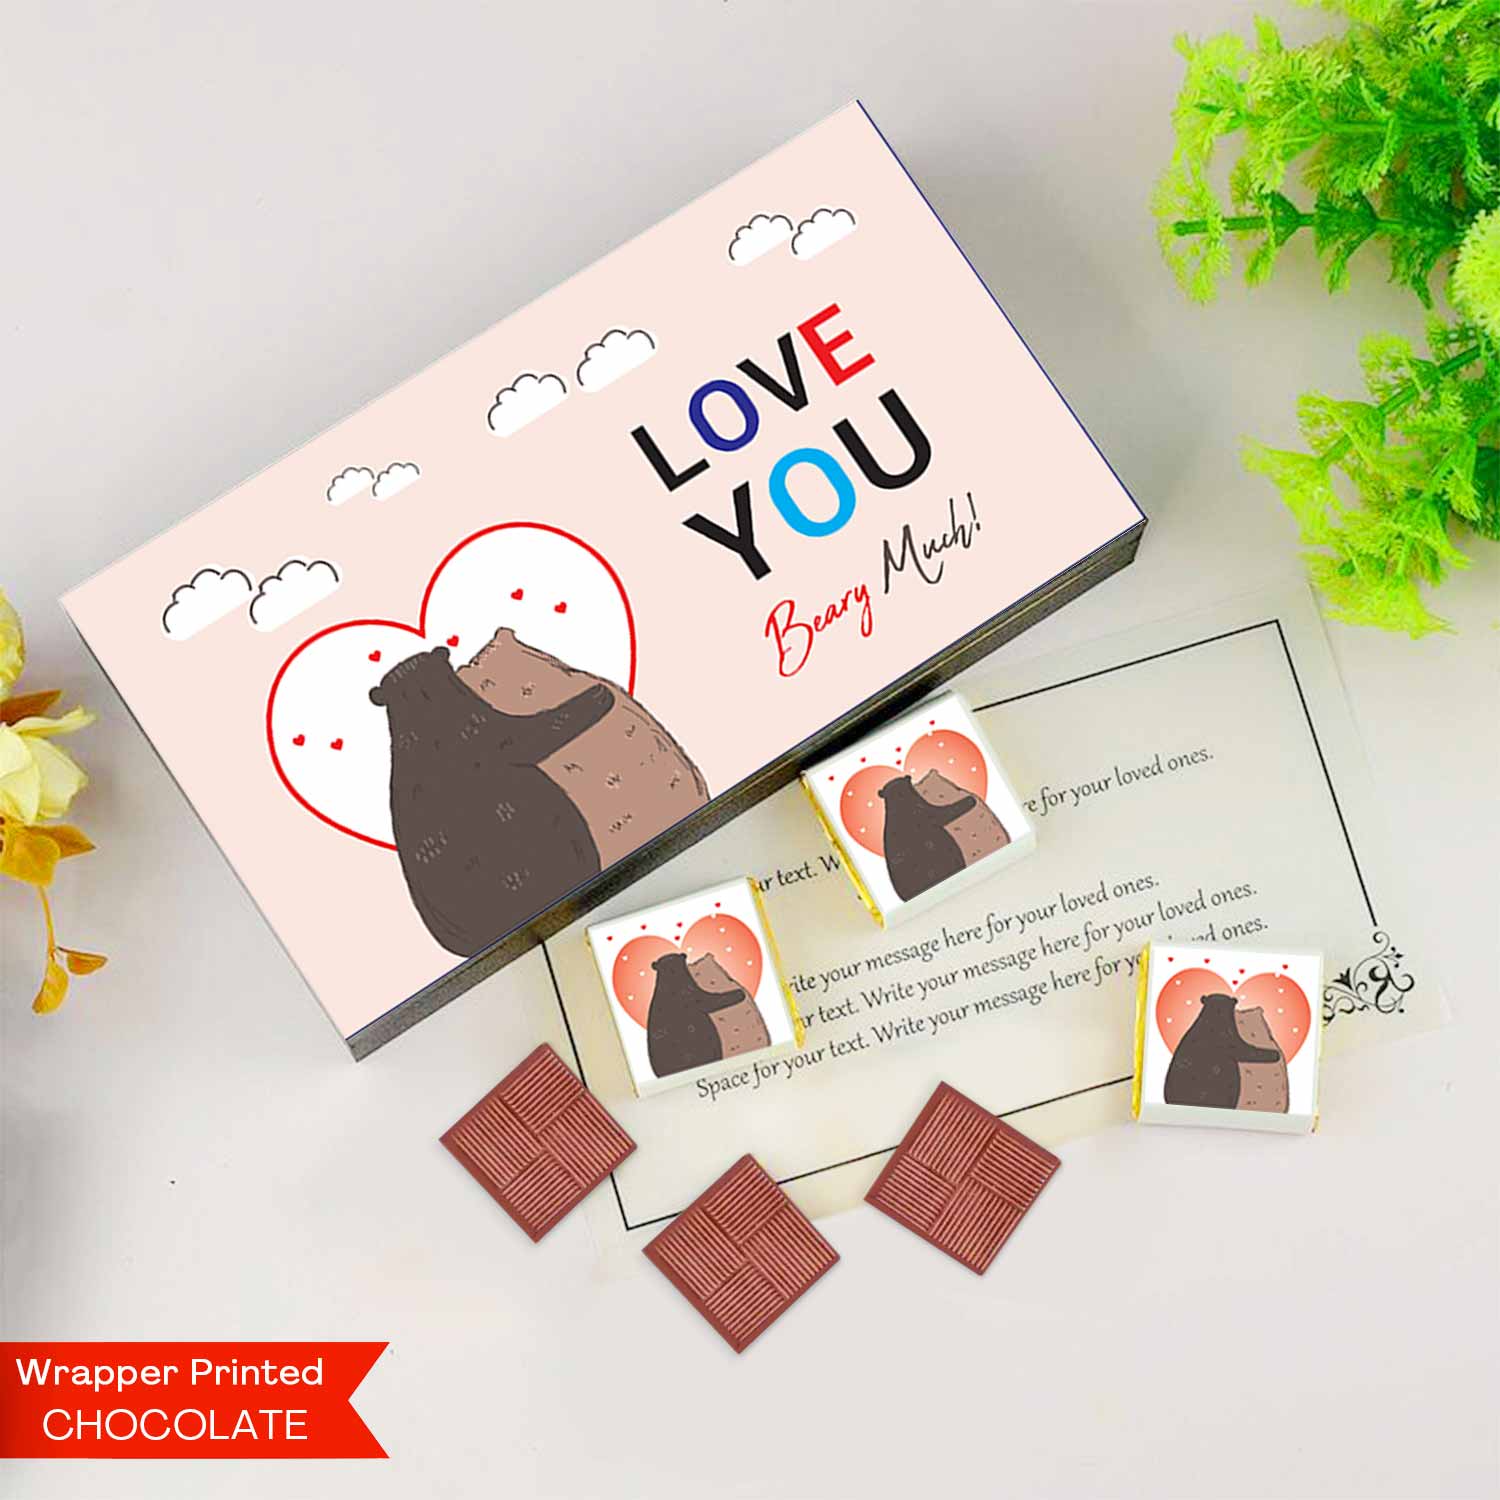 design your own chocolate bar wrapper online printed chocolate wrappers custom printed chocolate personalised chocolate wrappers personalised chocolates with names personalised chocolate wrappers near me